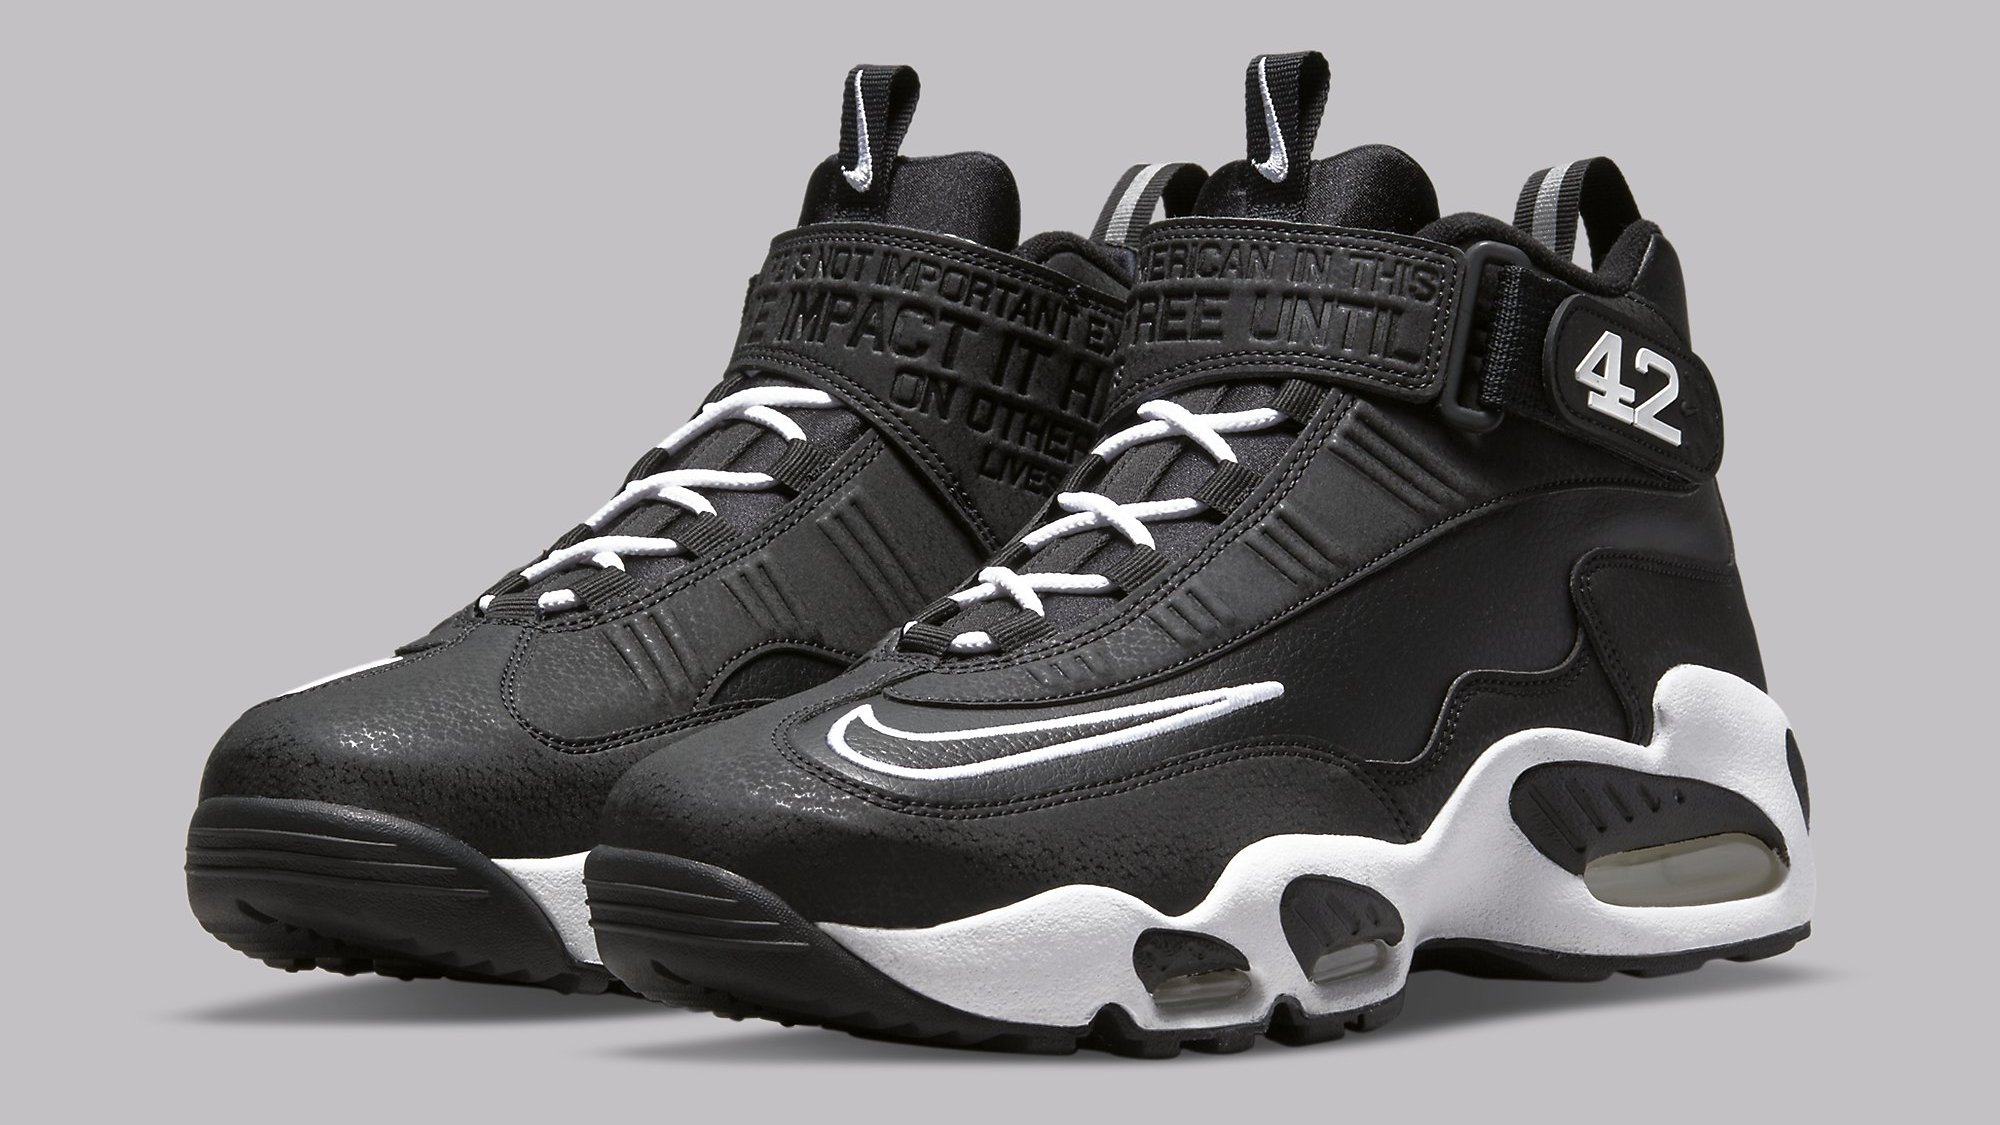 Ken Griffey Jr. Honors Jackie Robinson With This Nike Air Griffey Max 1